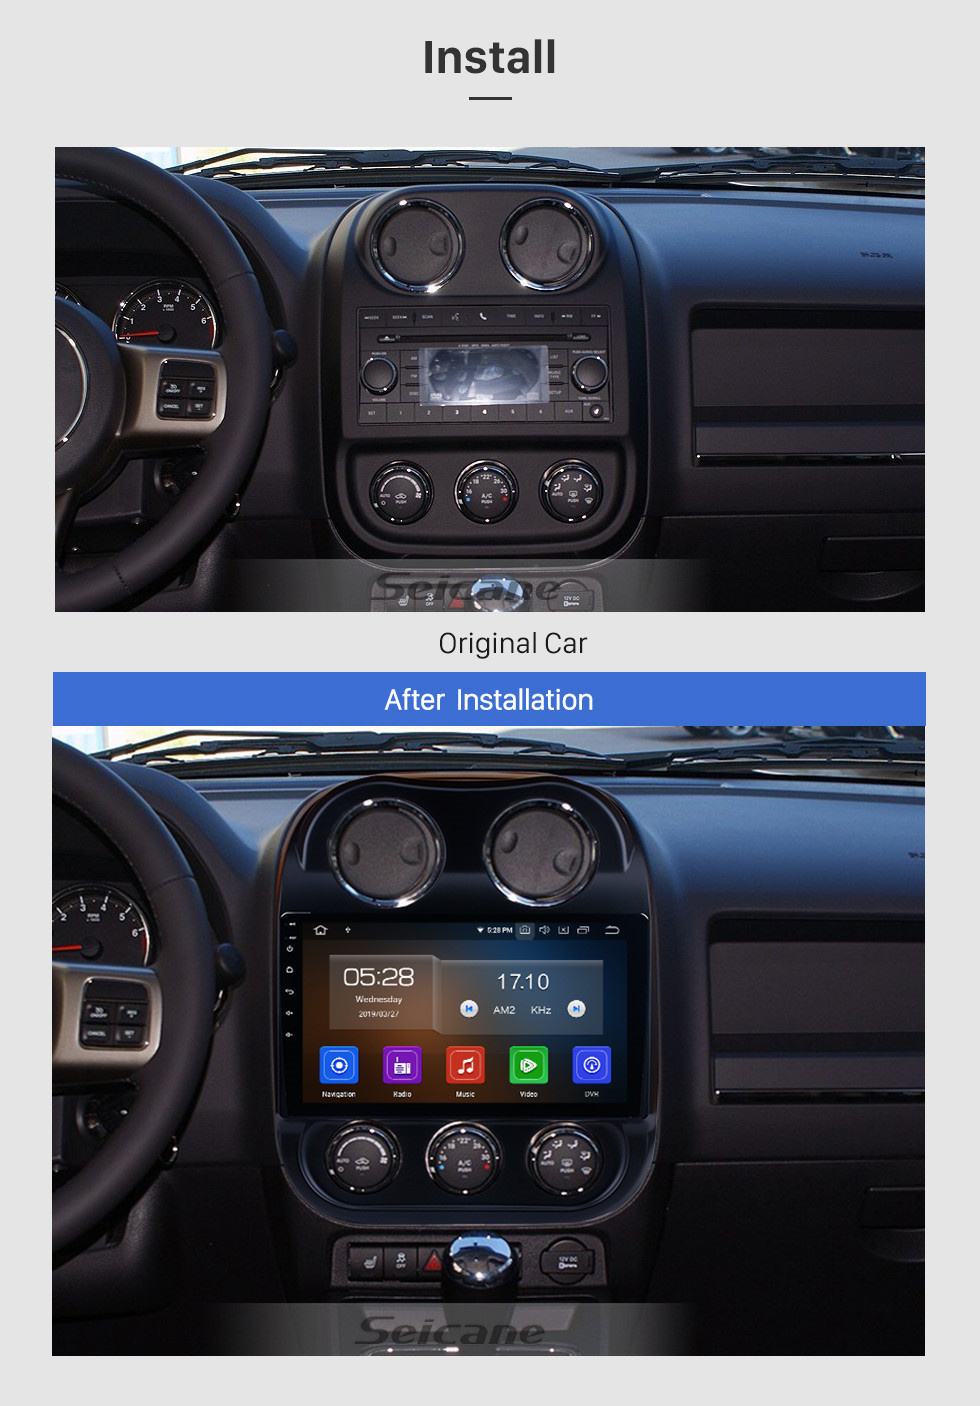 Seicane 10.1 Inch Android 11.0 Touch Screen radio Bluetooth GPS Navigation system For 2014 2015 Jeep Compass and 2016 JEEP PATRIOT support TPMS DVR OBD II USB SD  WiFi Rear camera Steering Wheel Control HD 1080P Video AUX